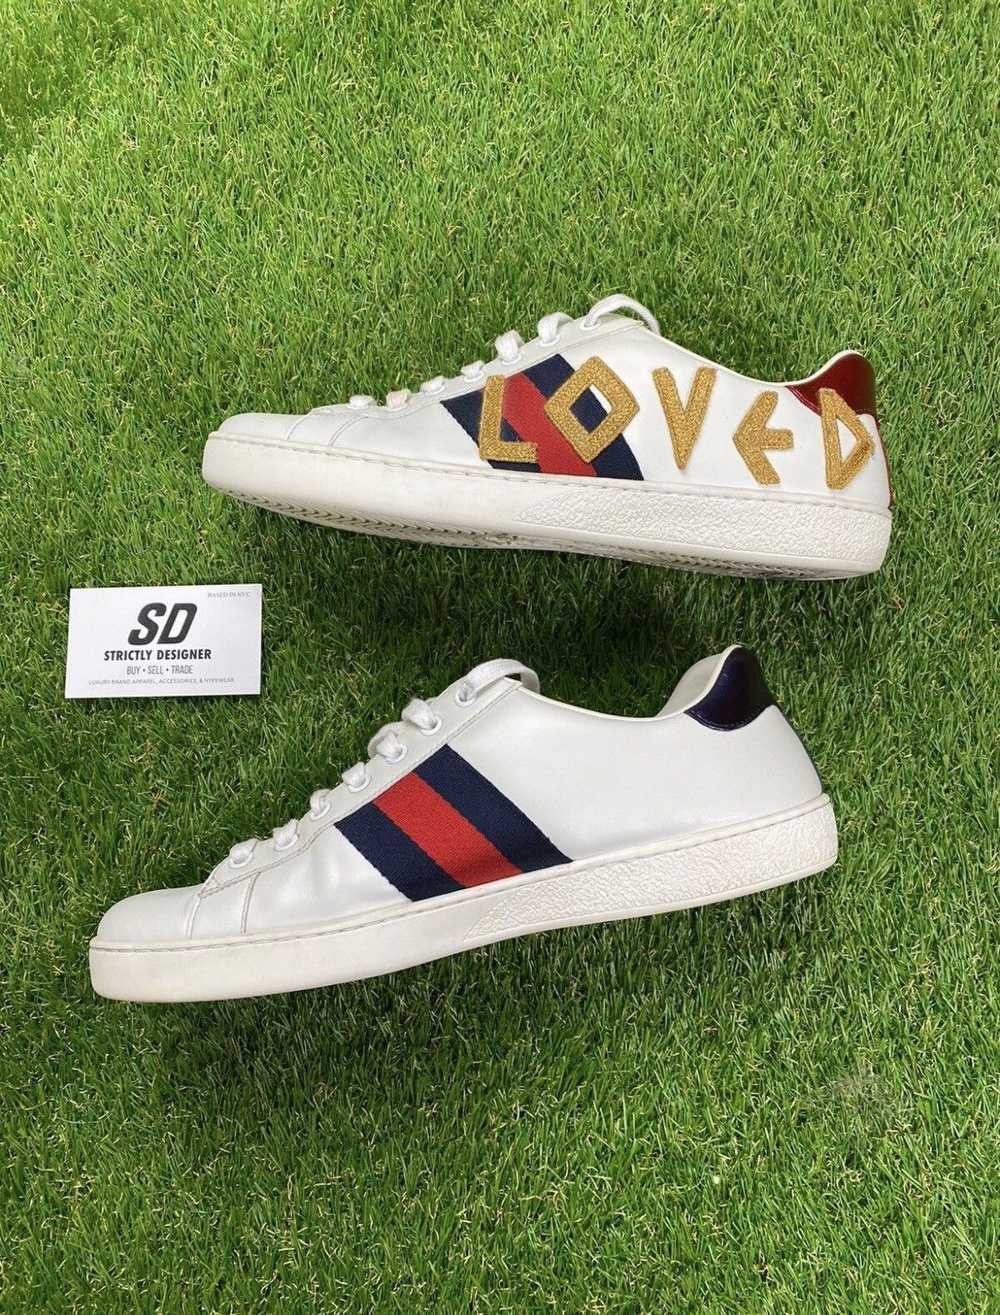 Designer × Gucci Gucci Ace “Loved” Shoes - image 1